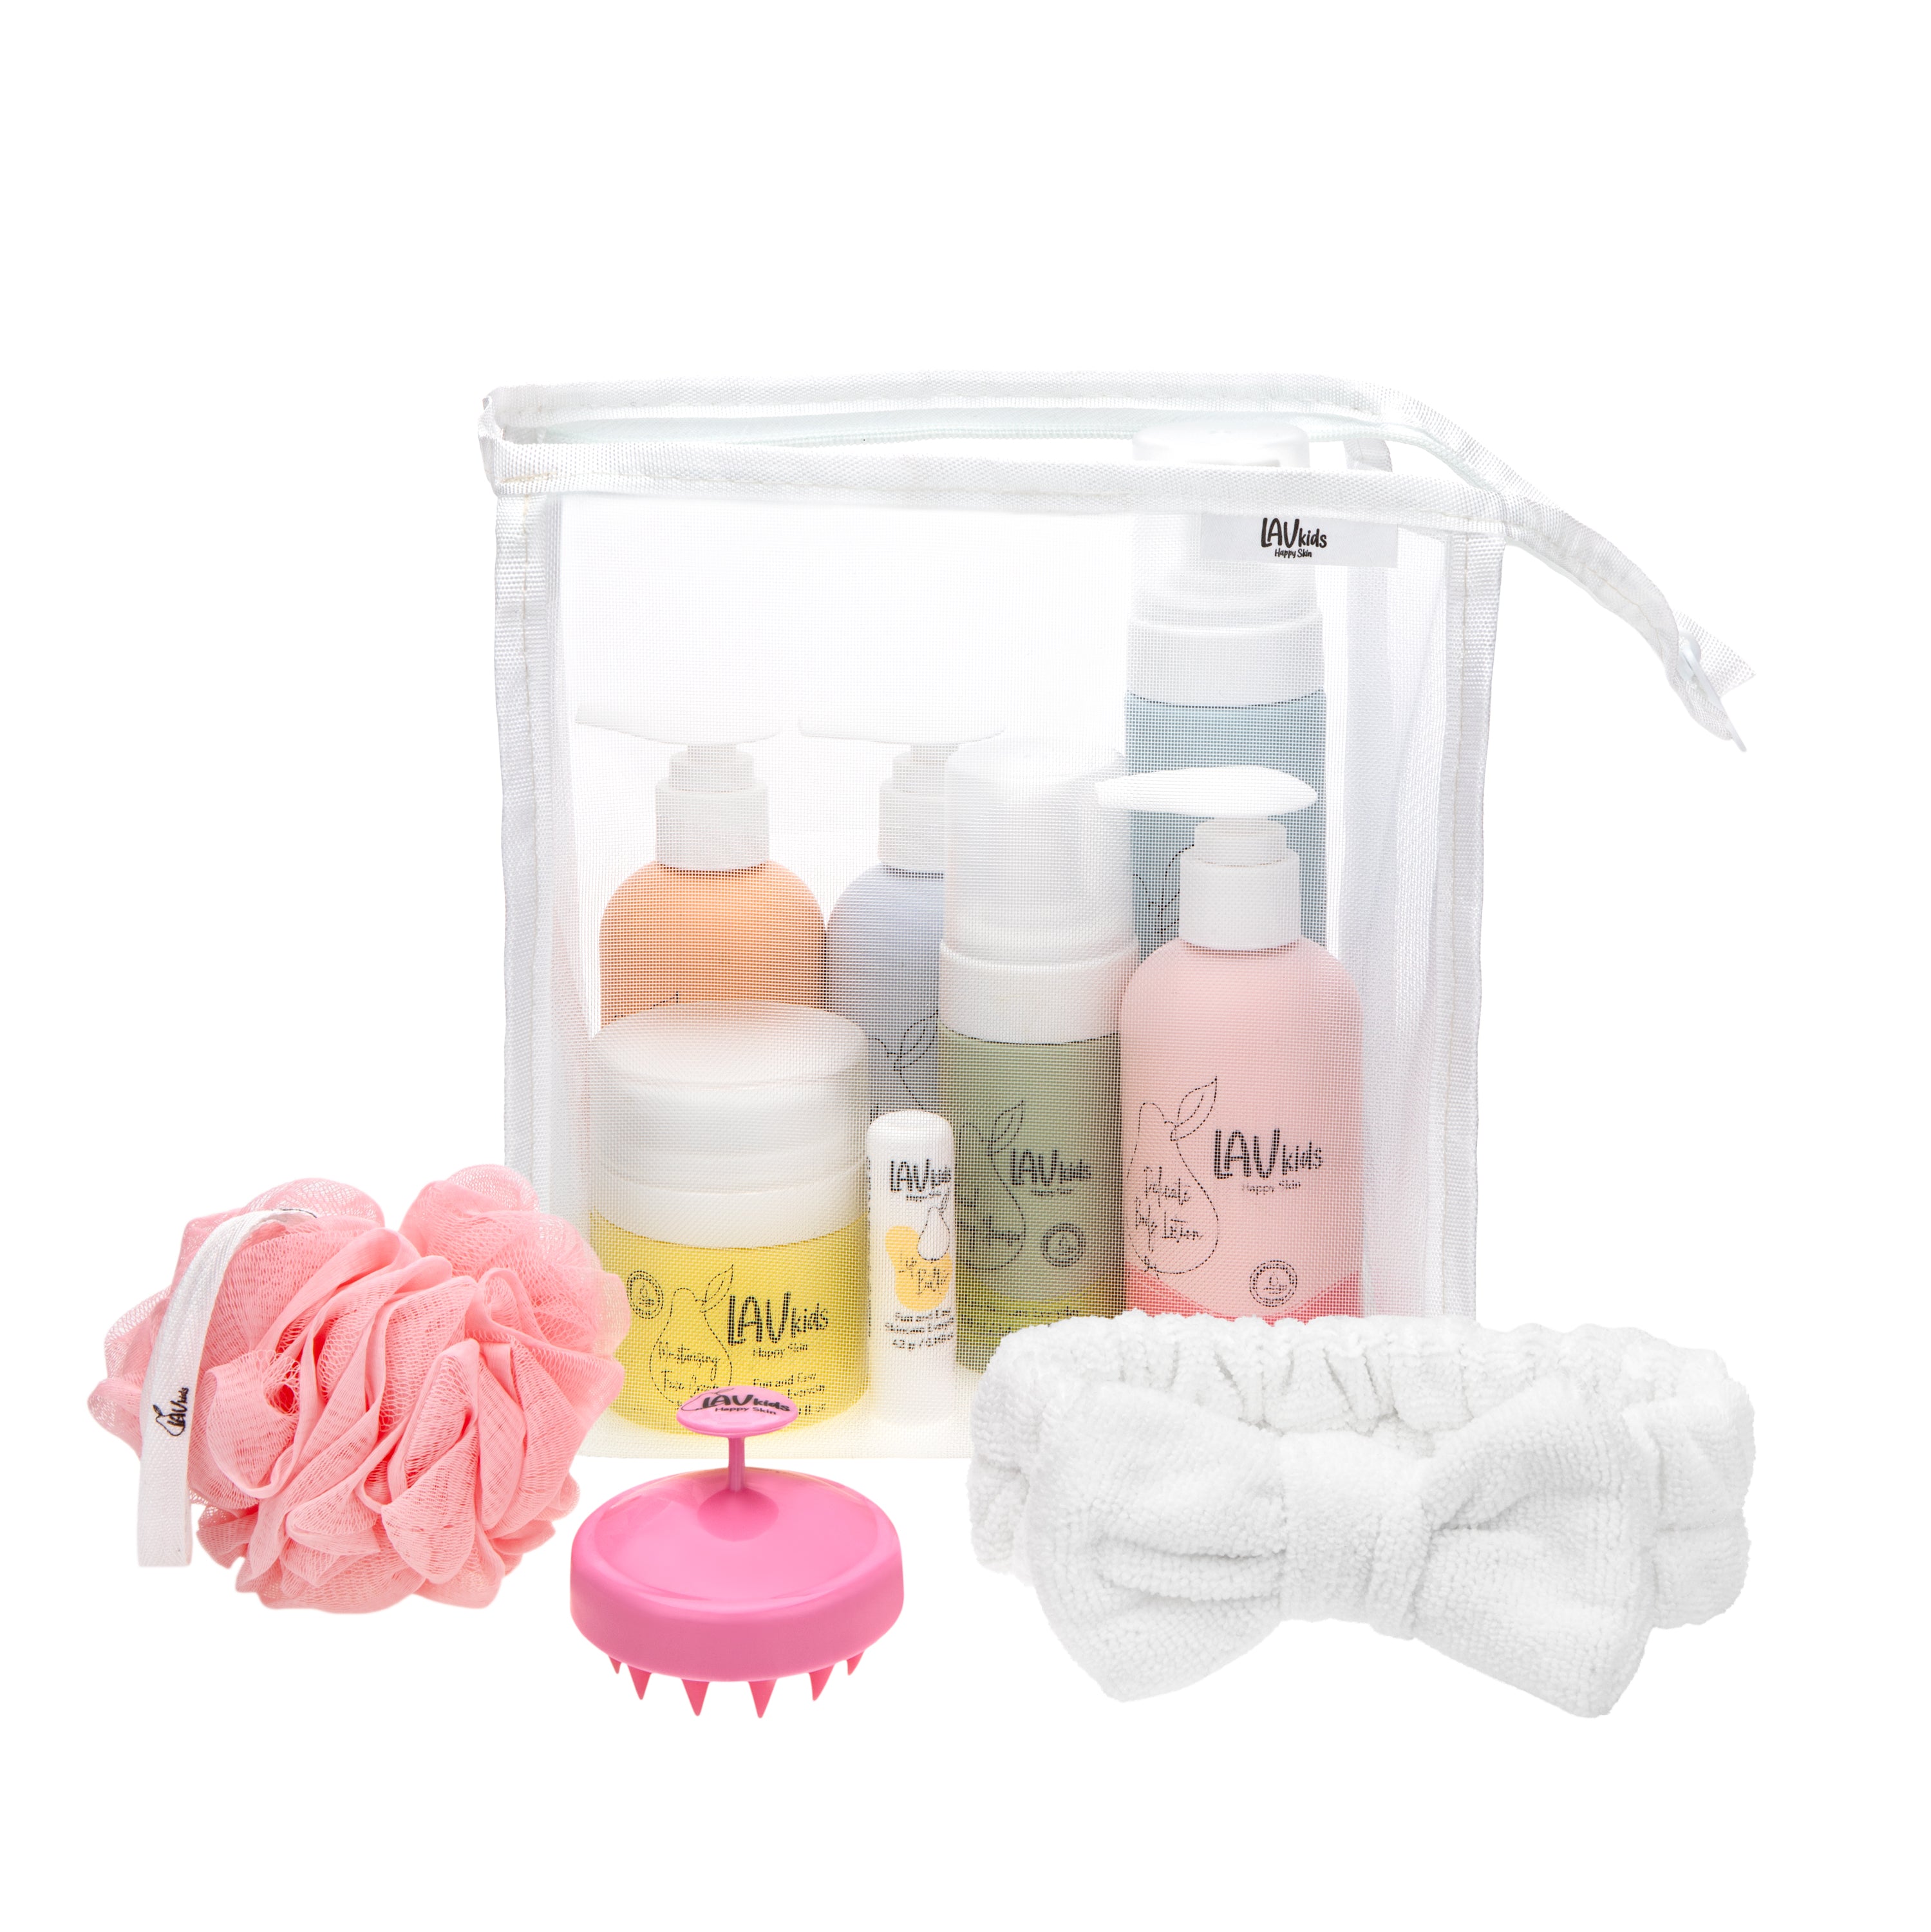 Complete Gentle Care Bundle with Accessories